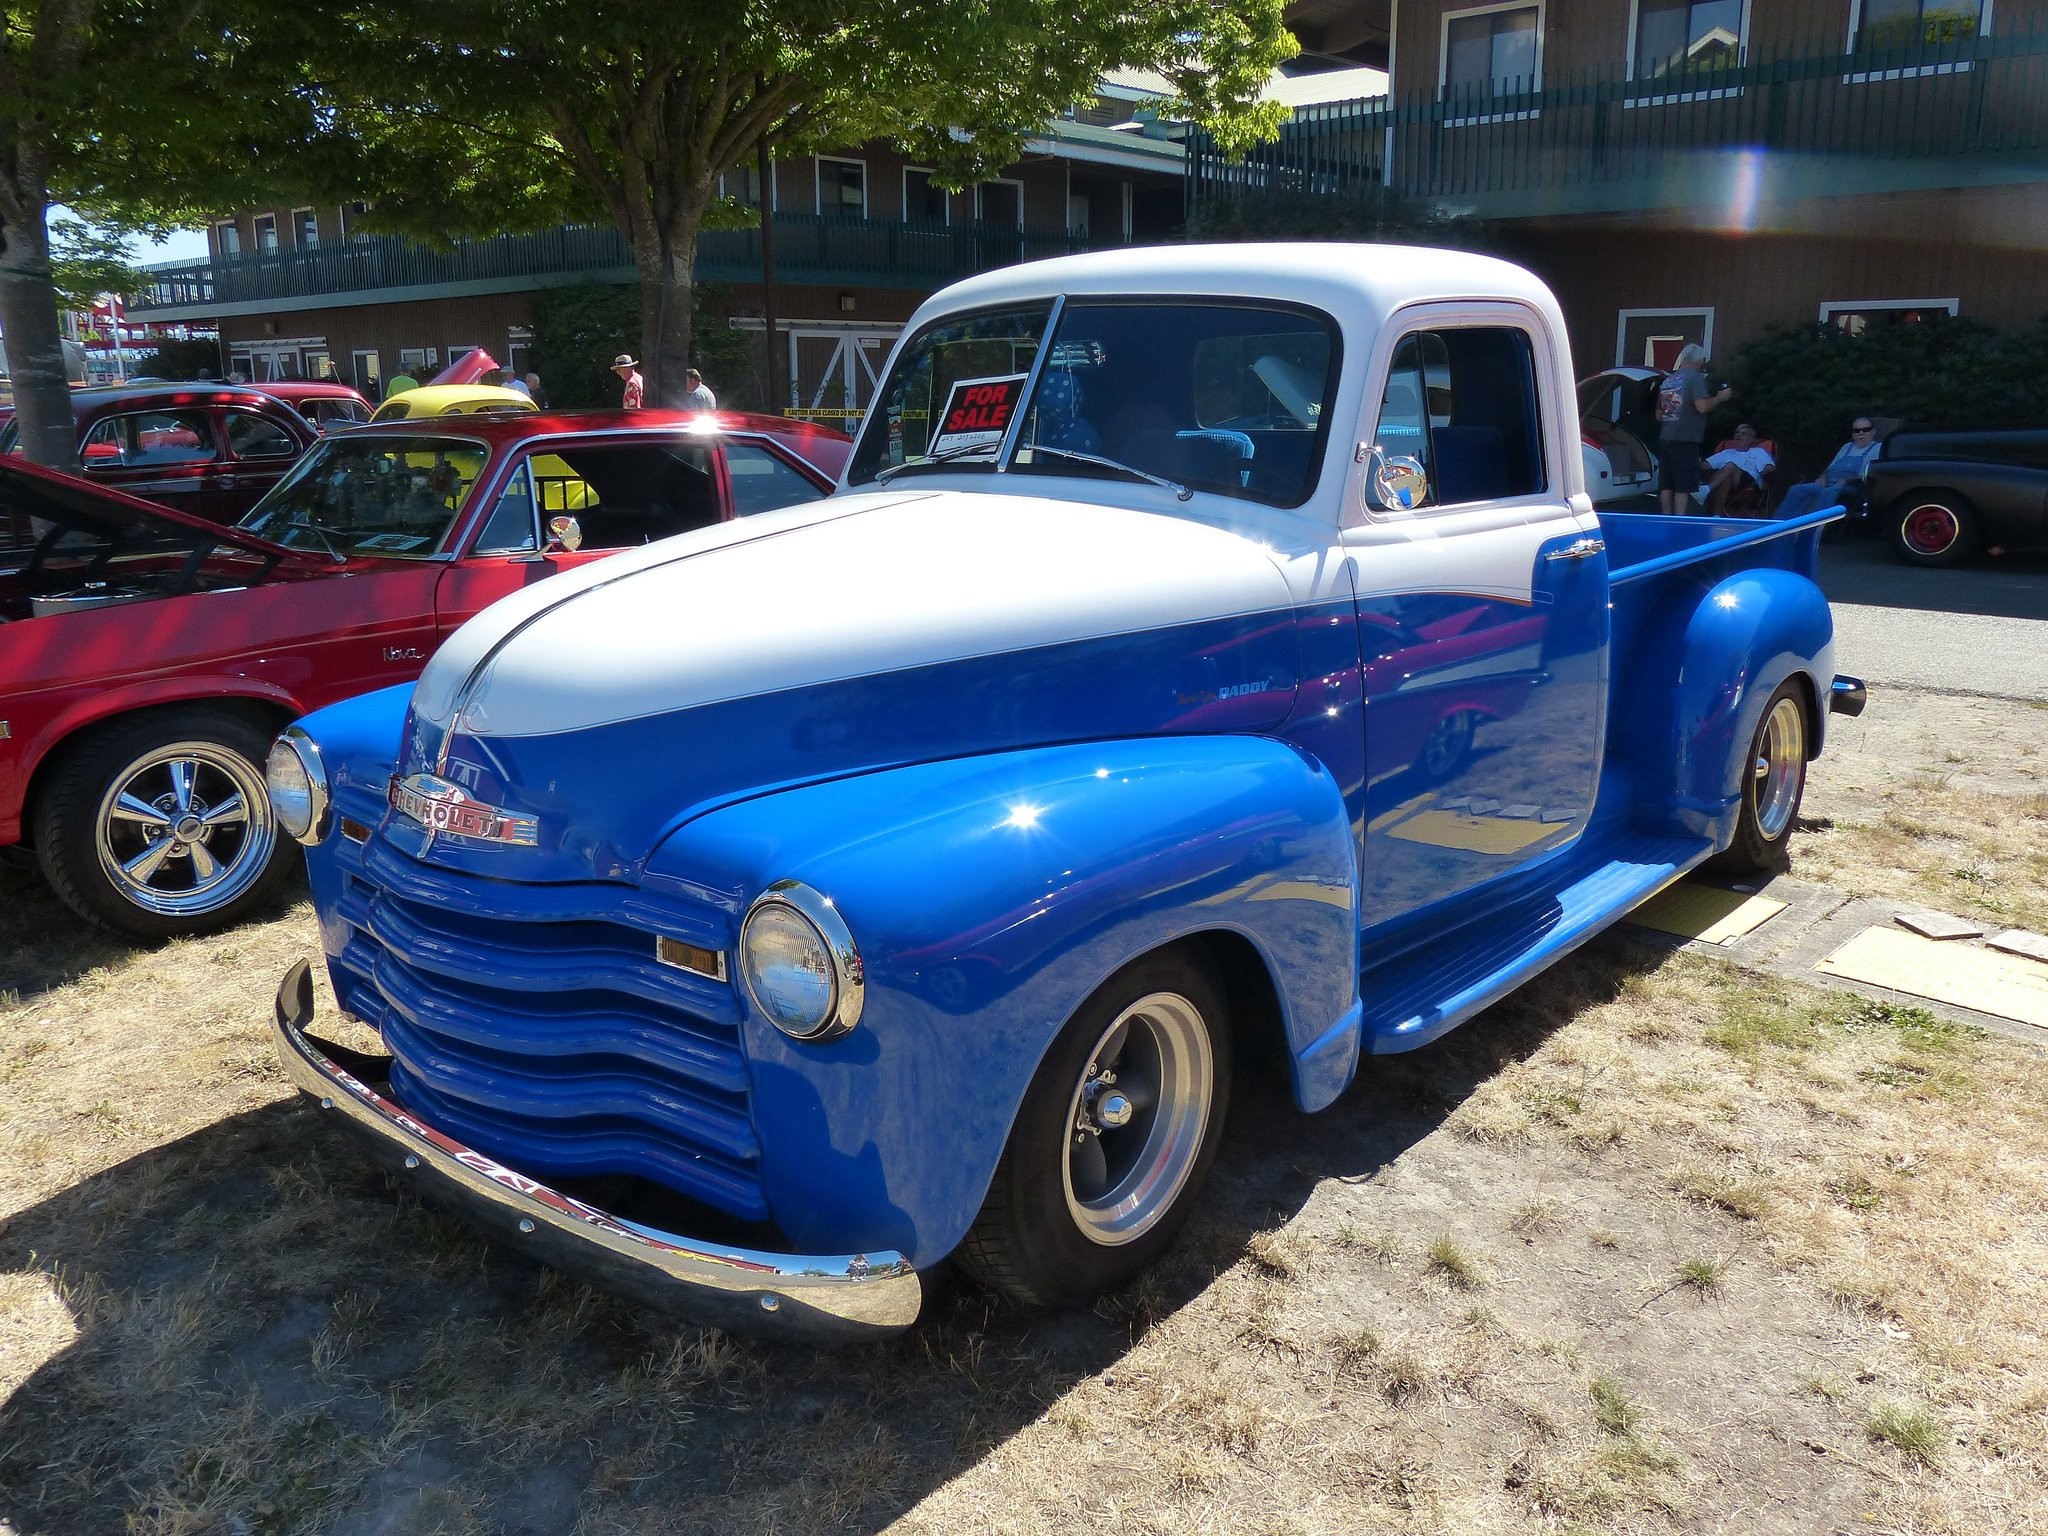 2048x1536 Chevrolet chevy old classic custom cars truck Pickup wallpaper |   | 678409 | WallpaperUP